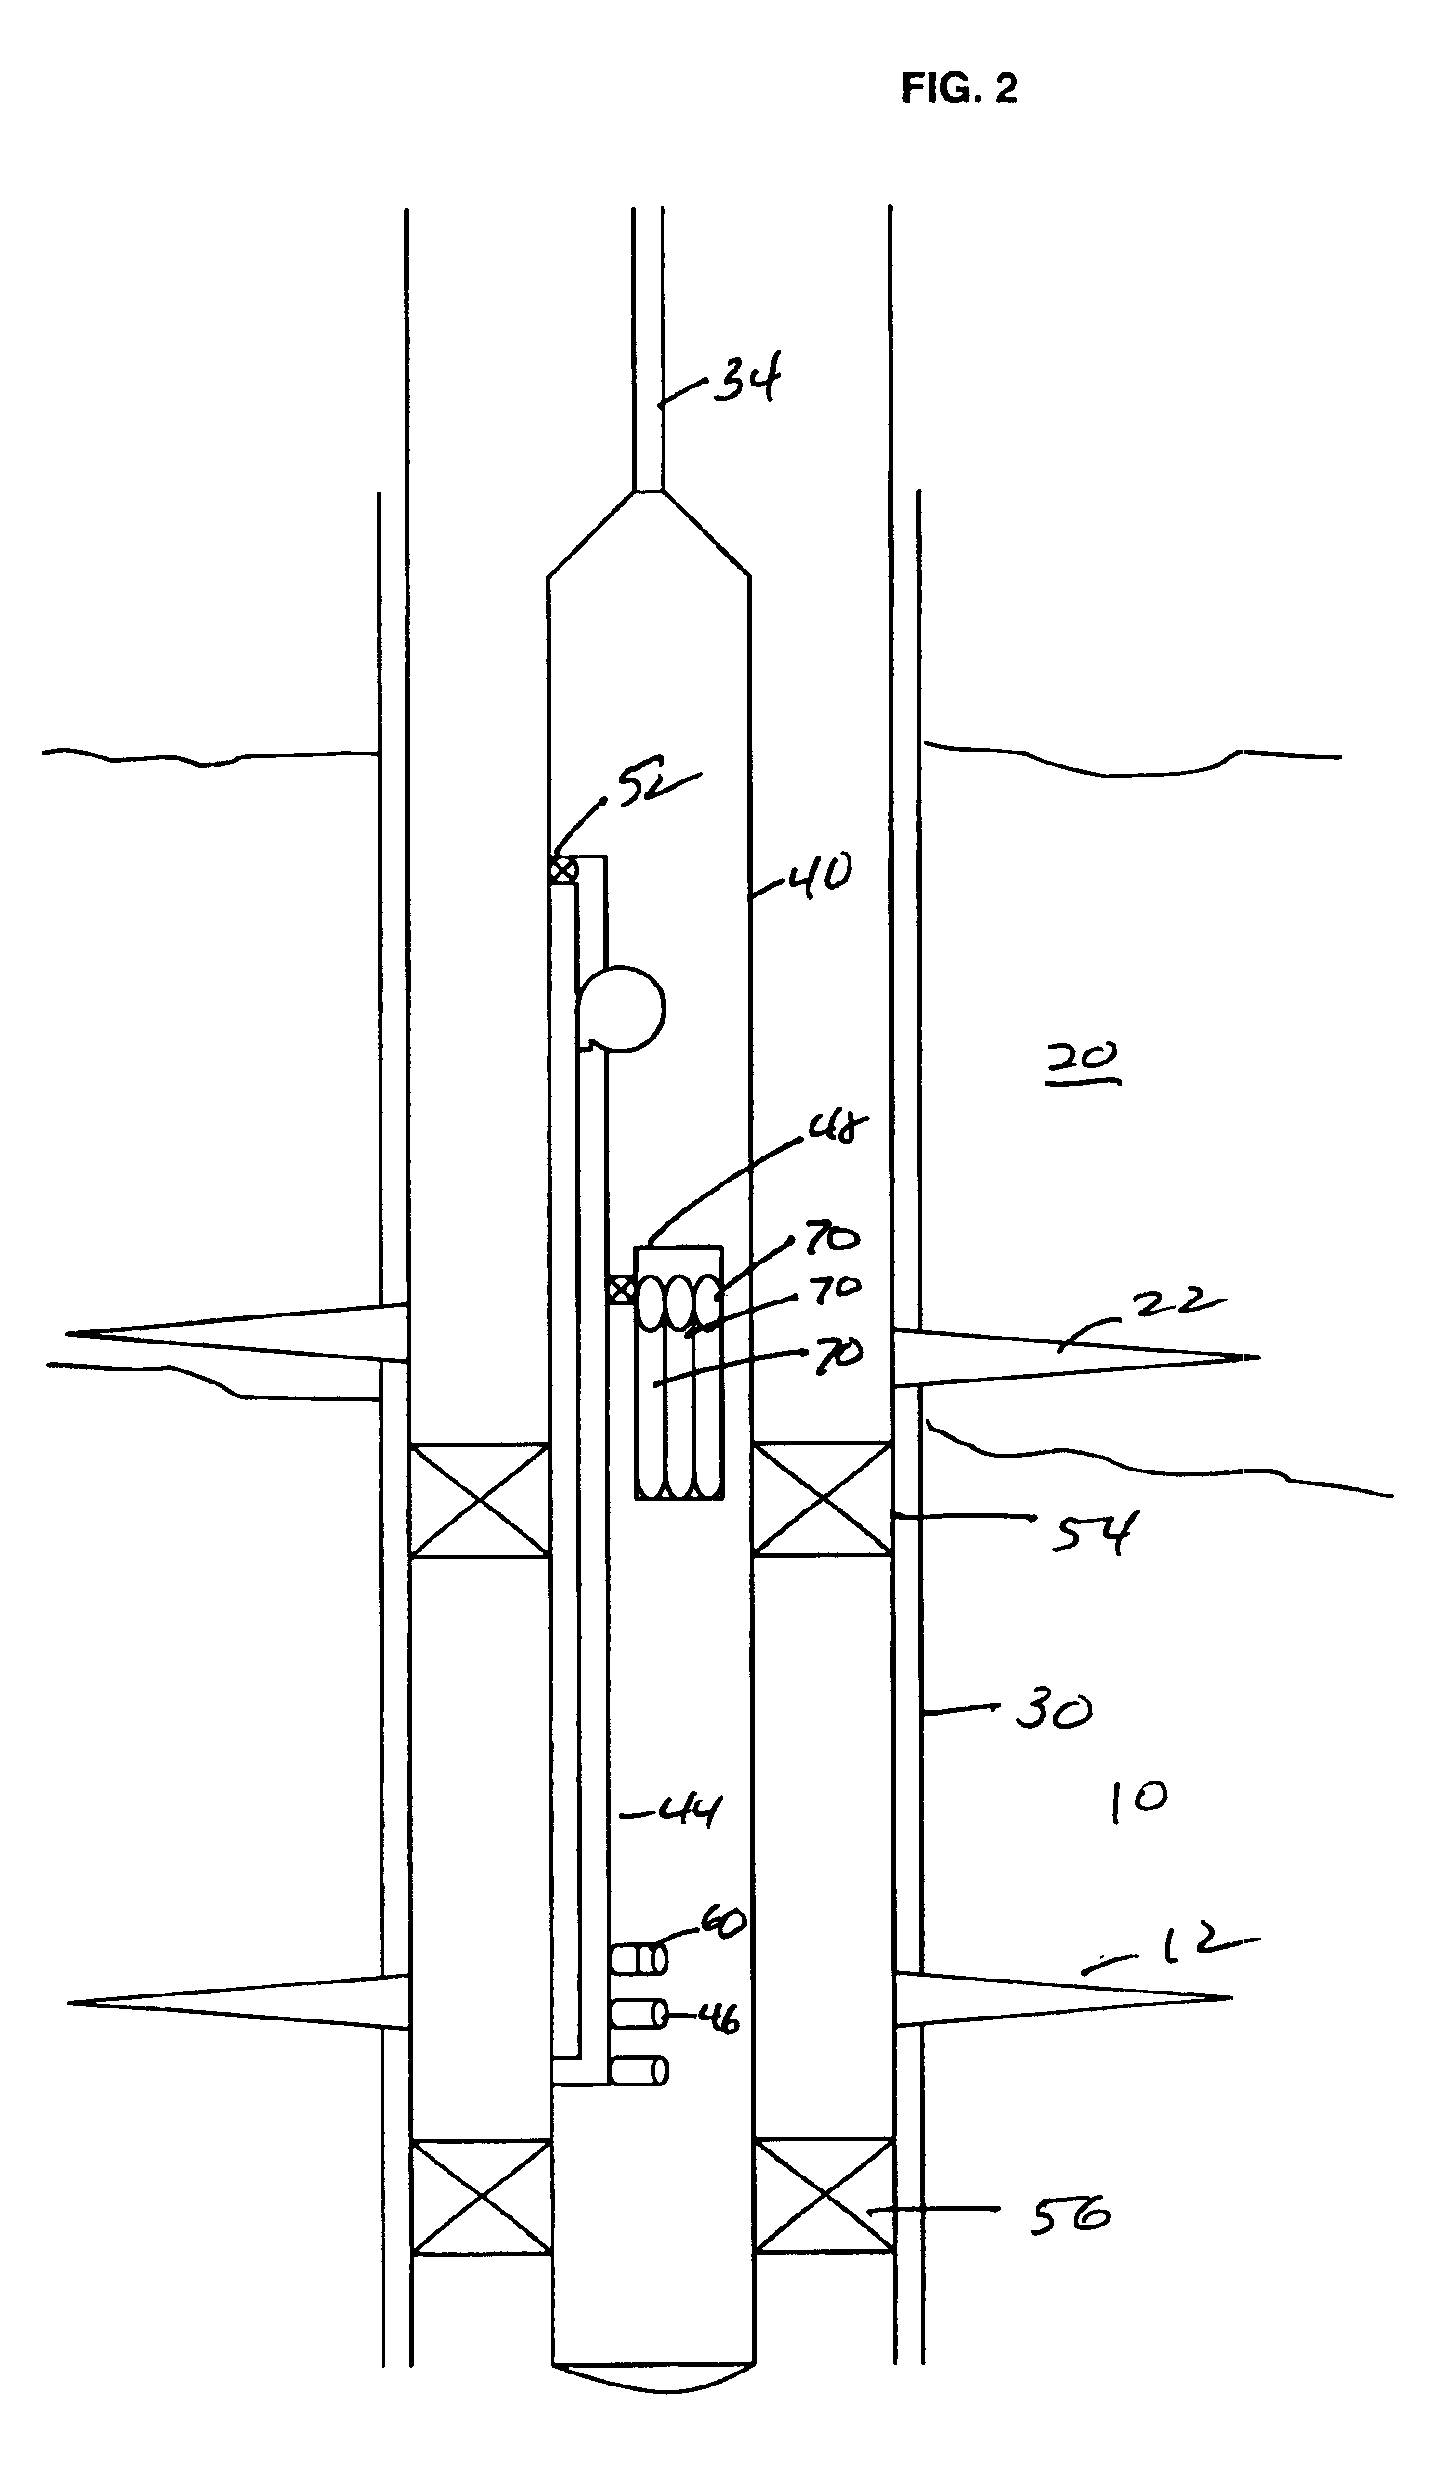 Retrieving a sample of formation fluid in as cased hole